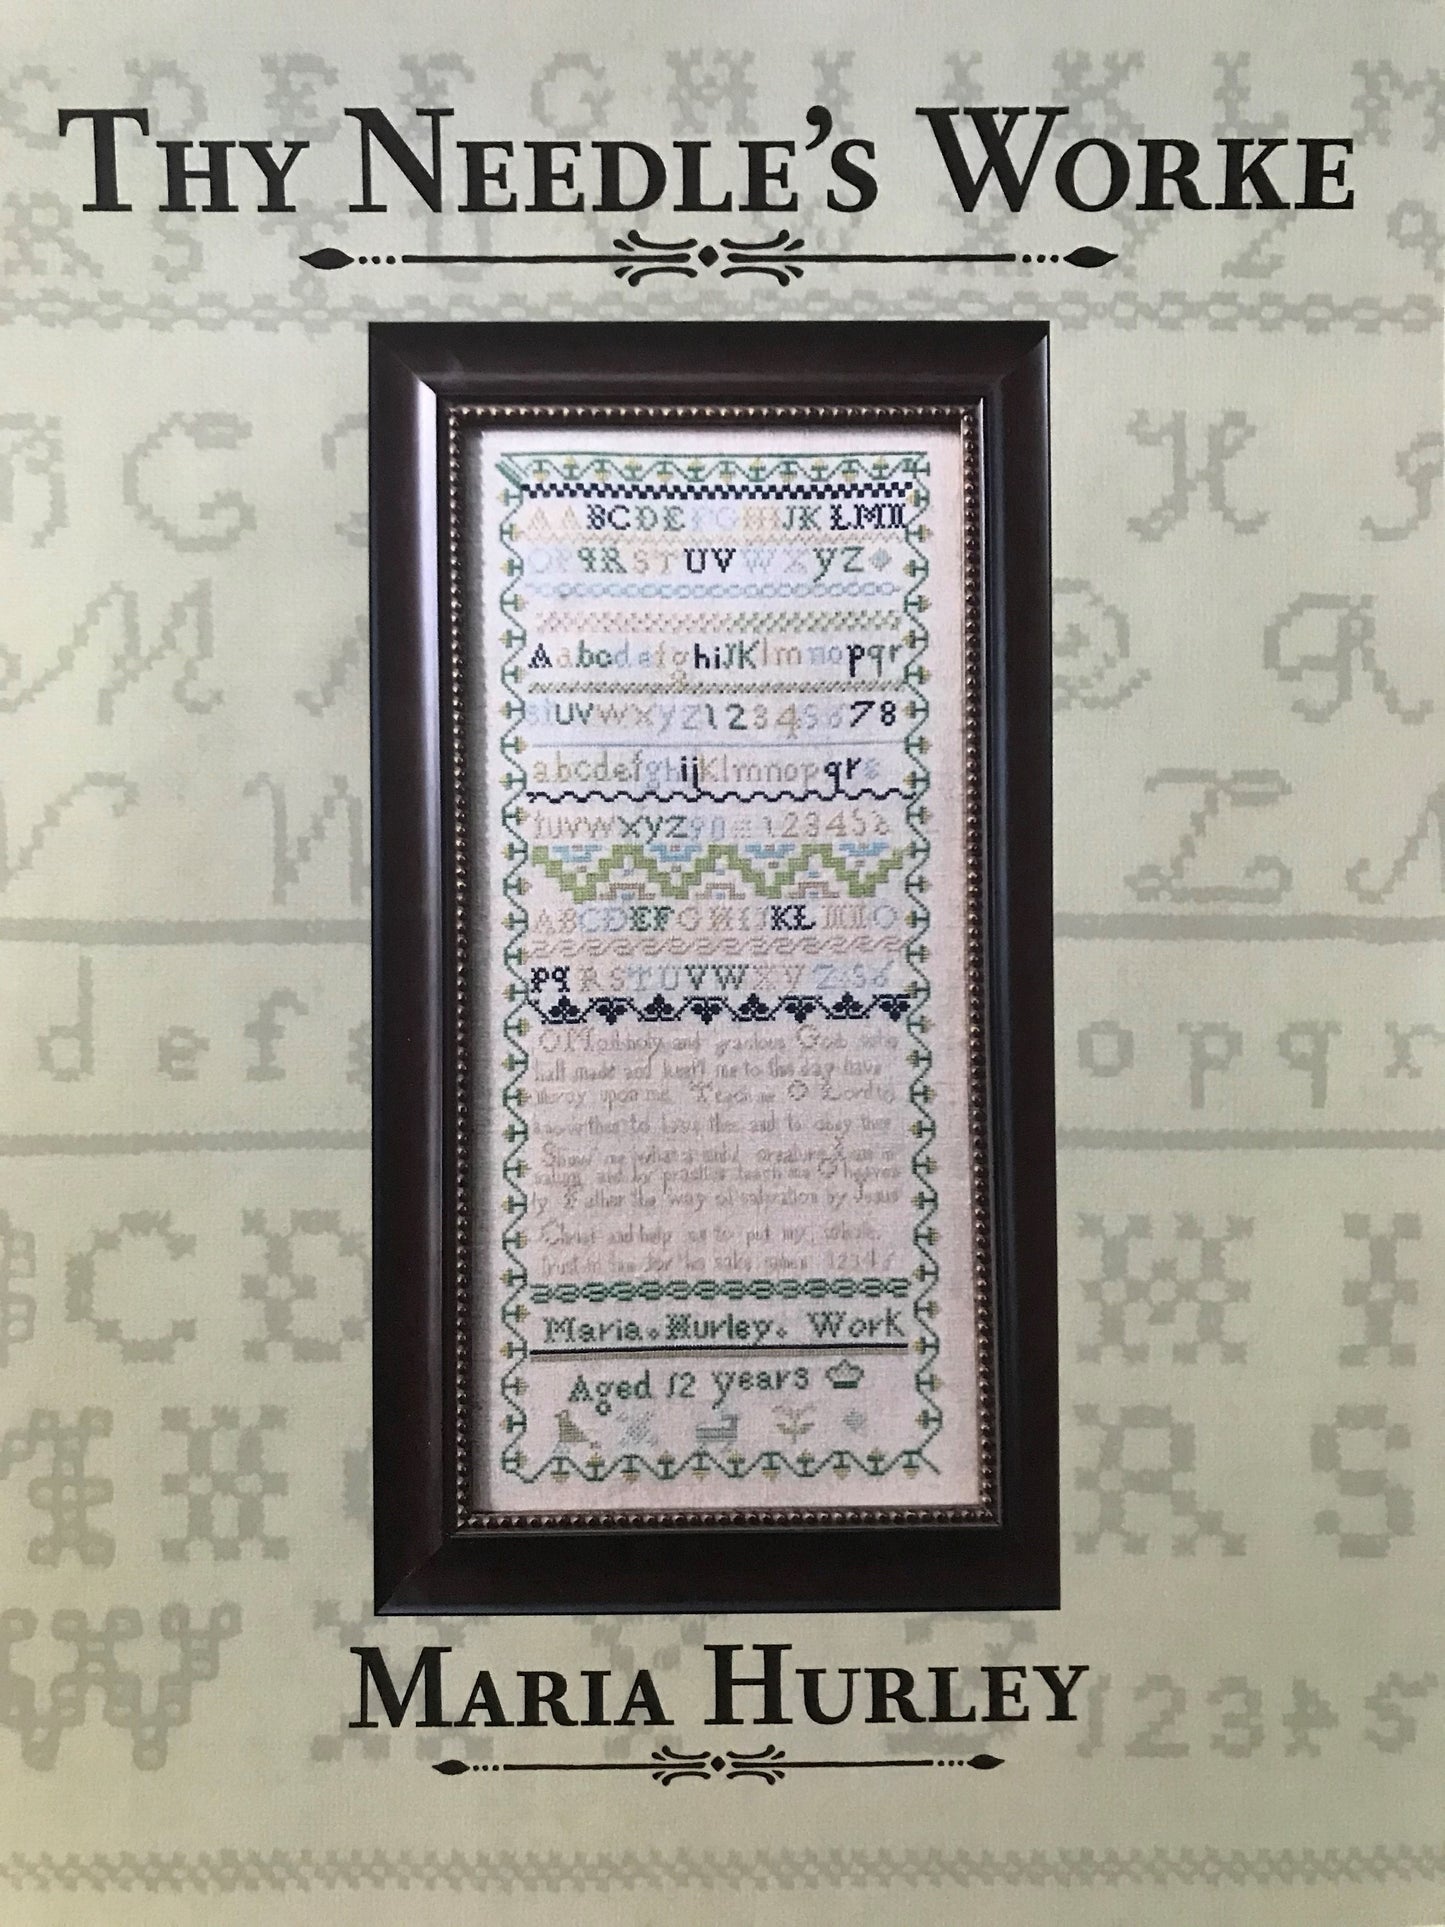 Maria Hurley - Reproduction Sampler Pattern by Thy Needles Worke